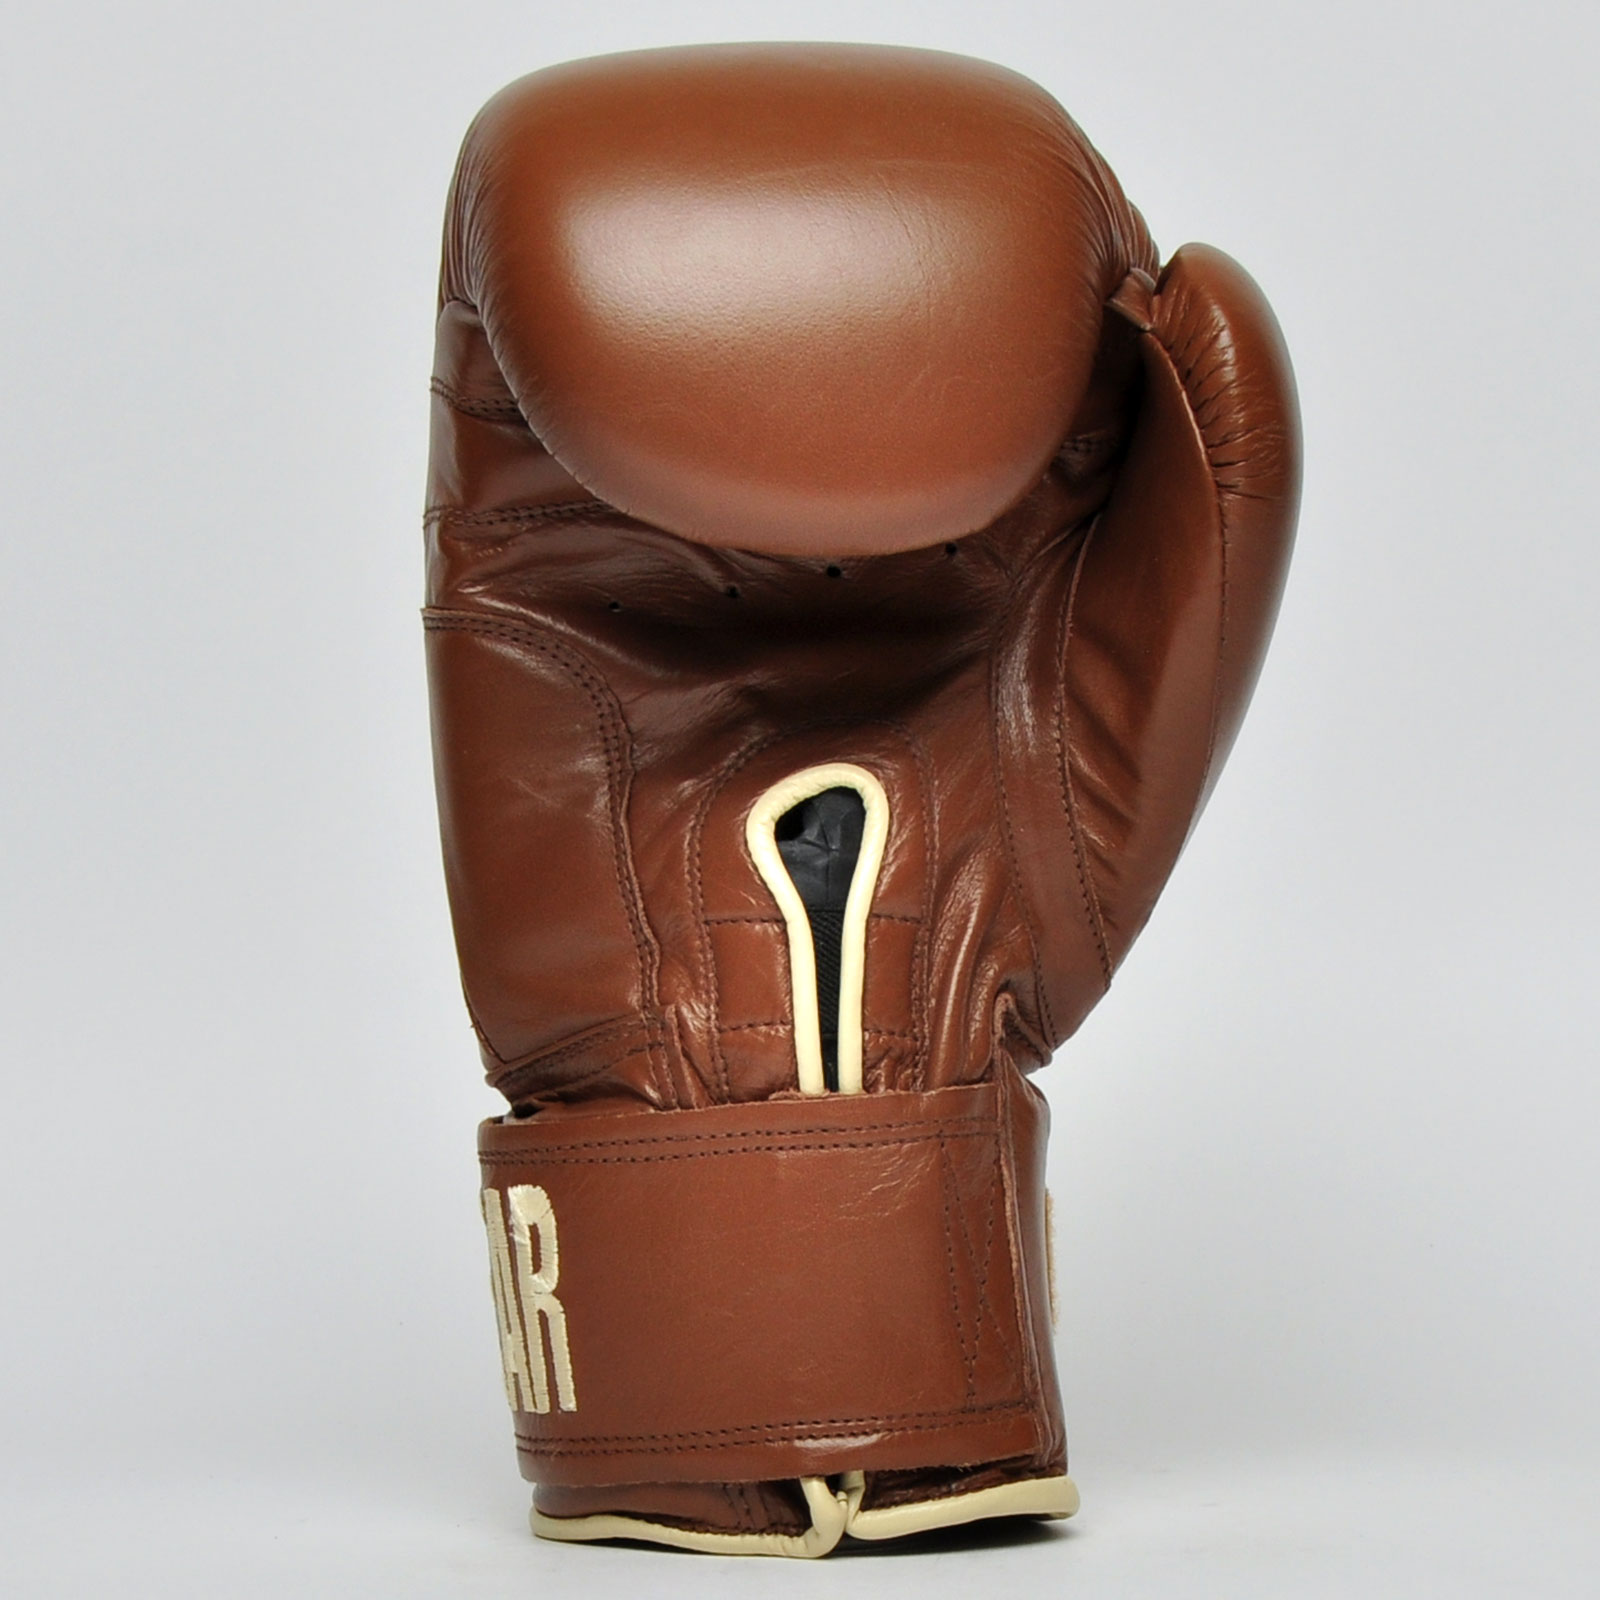 Tuf-Wear Classic Brown Leather Floor to Ceiling Ball